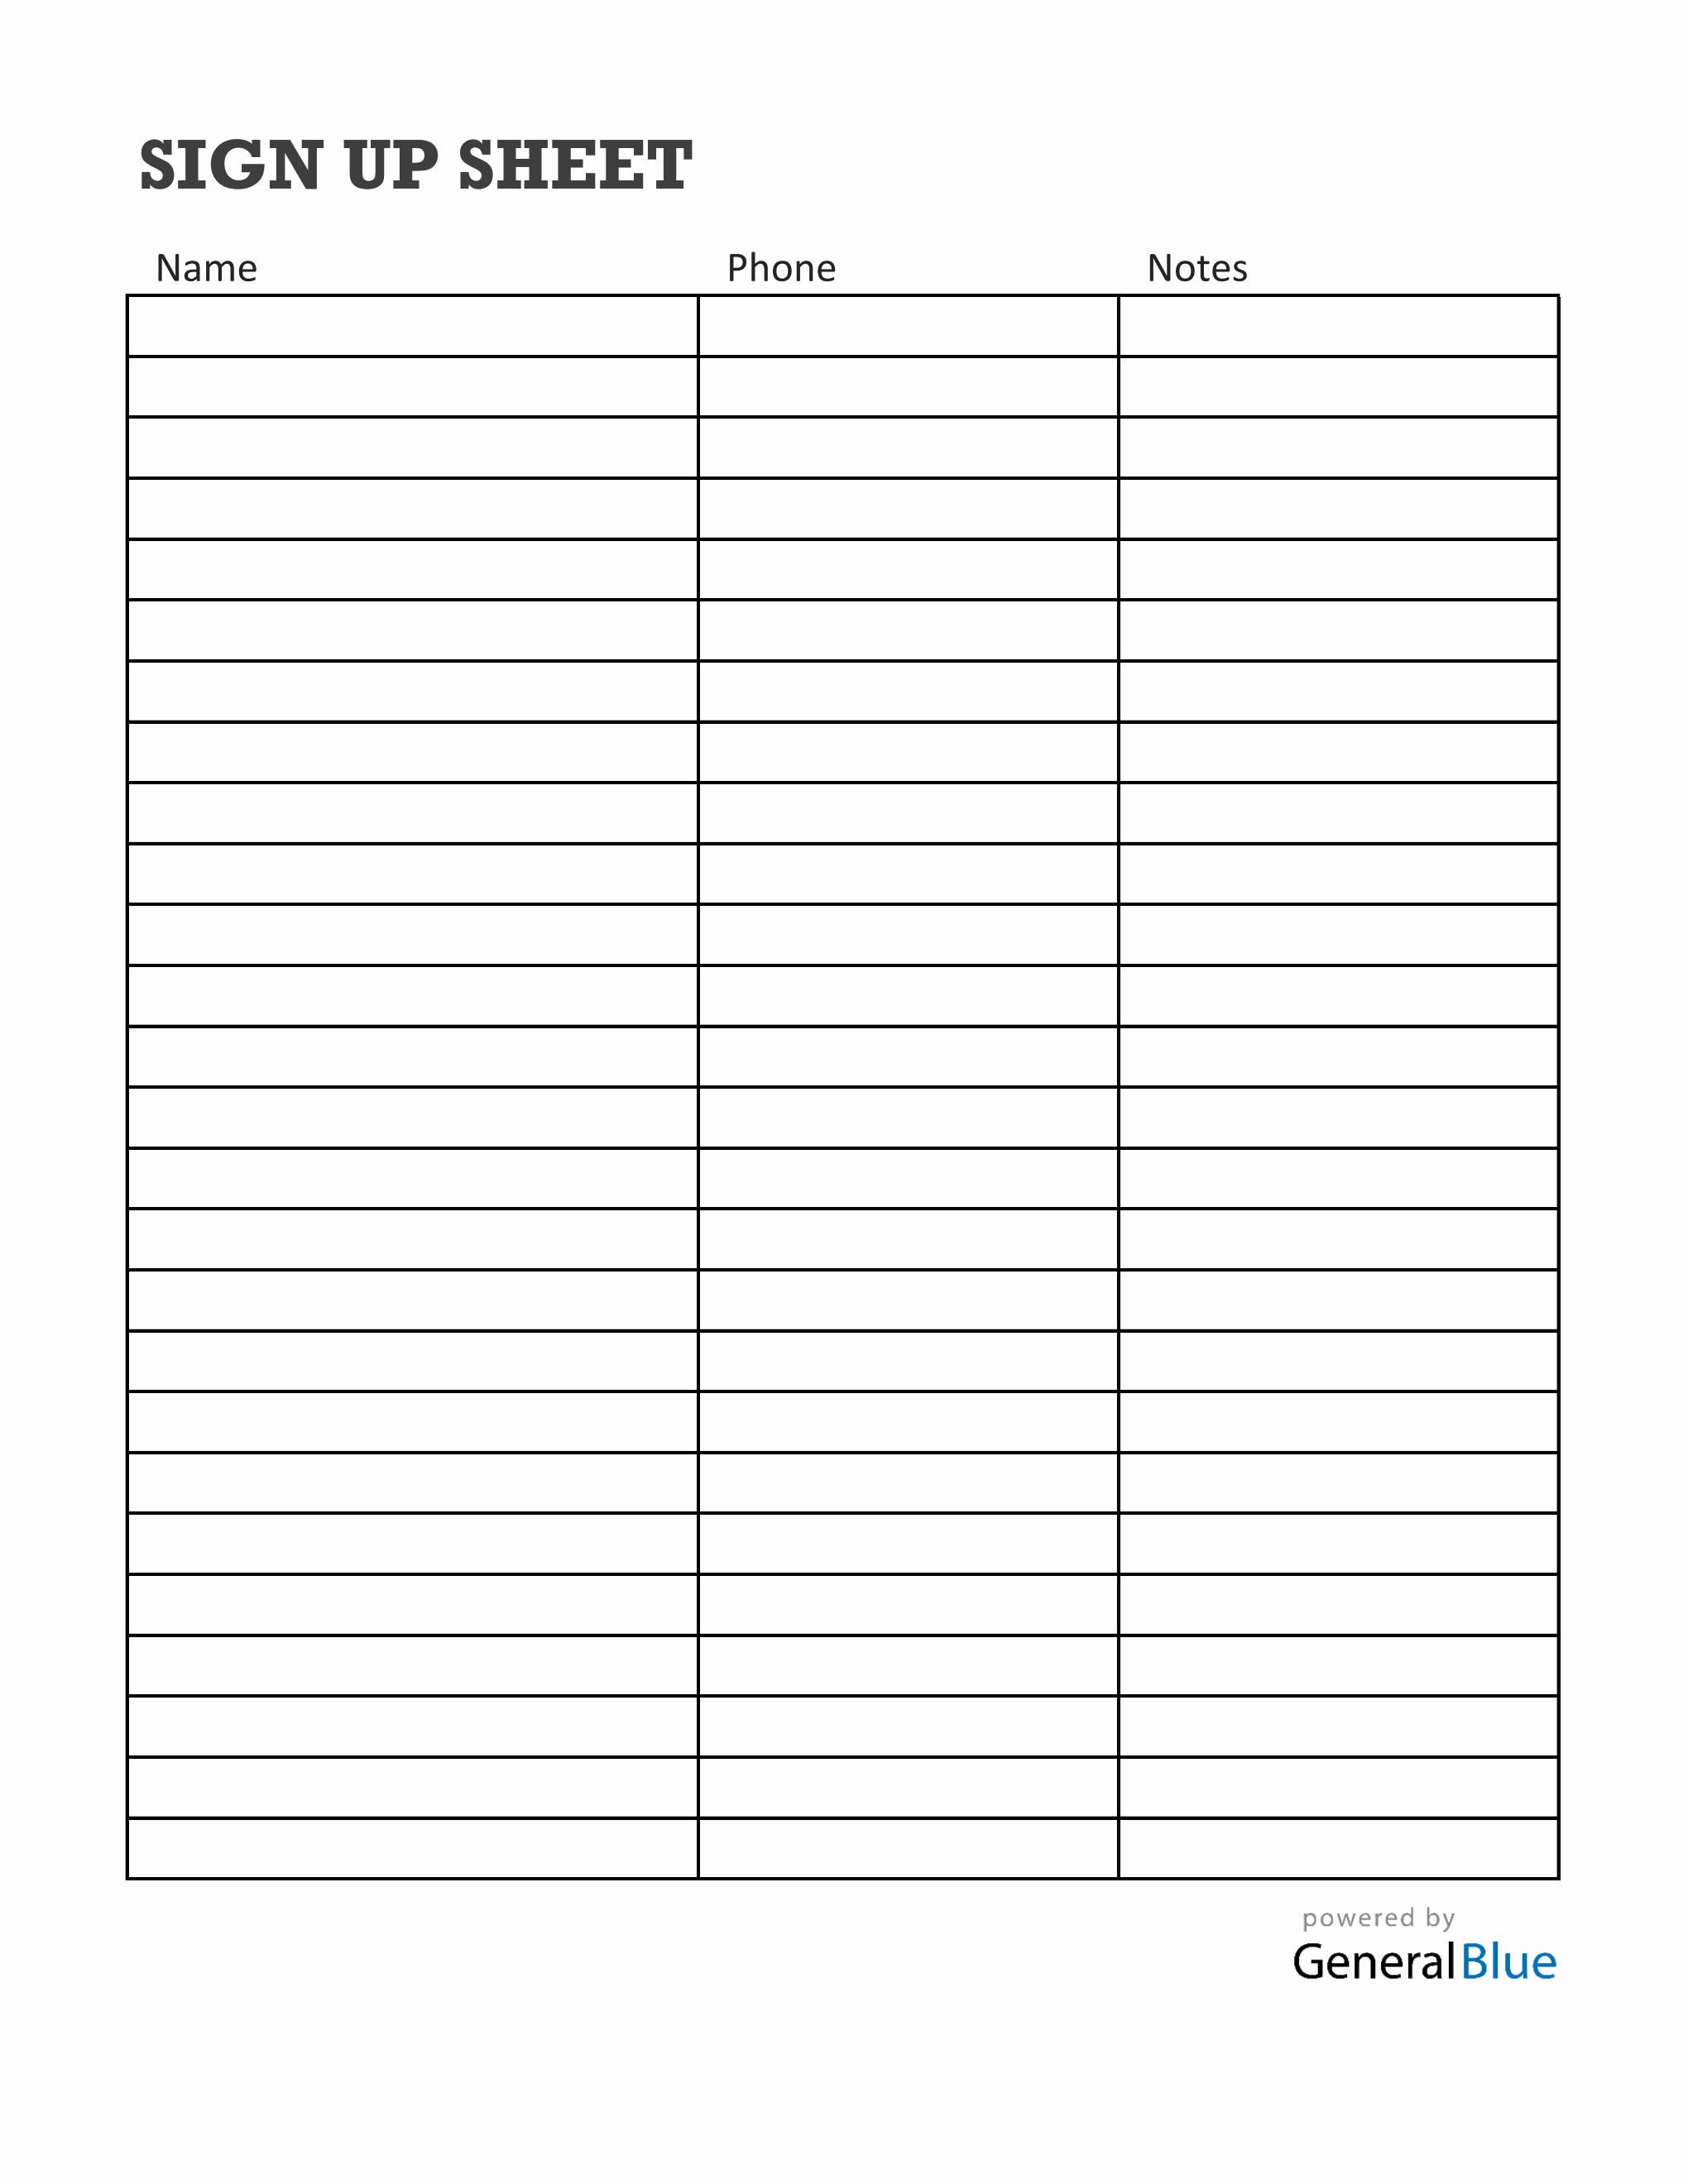 blank-sign-up-sheet-in-excel